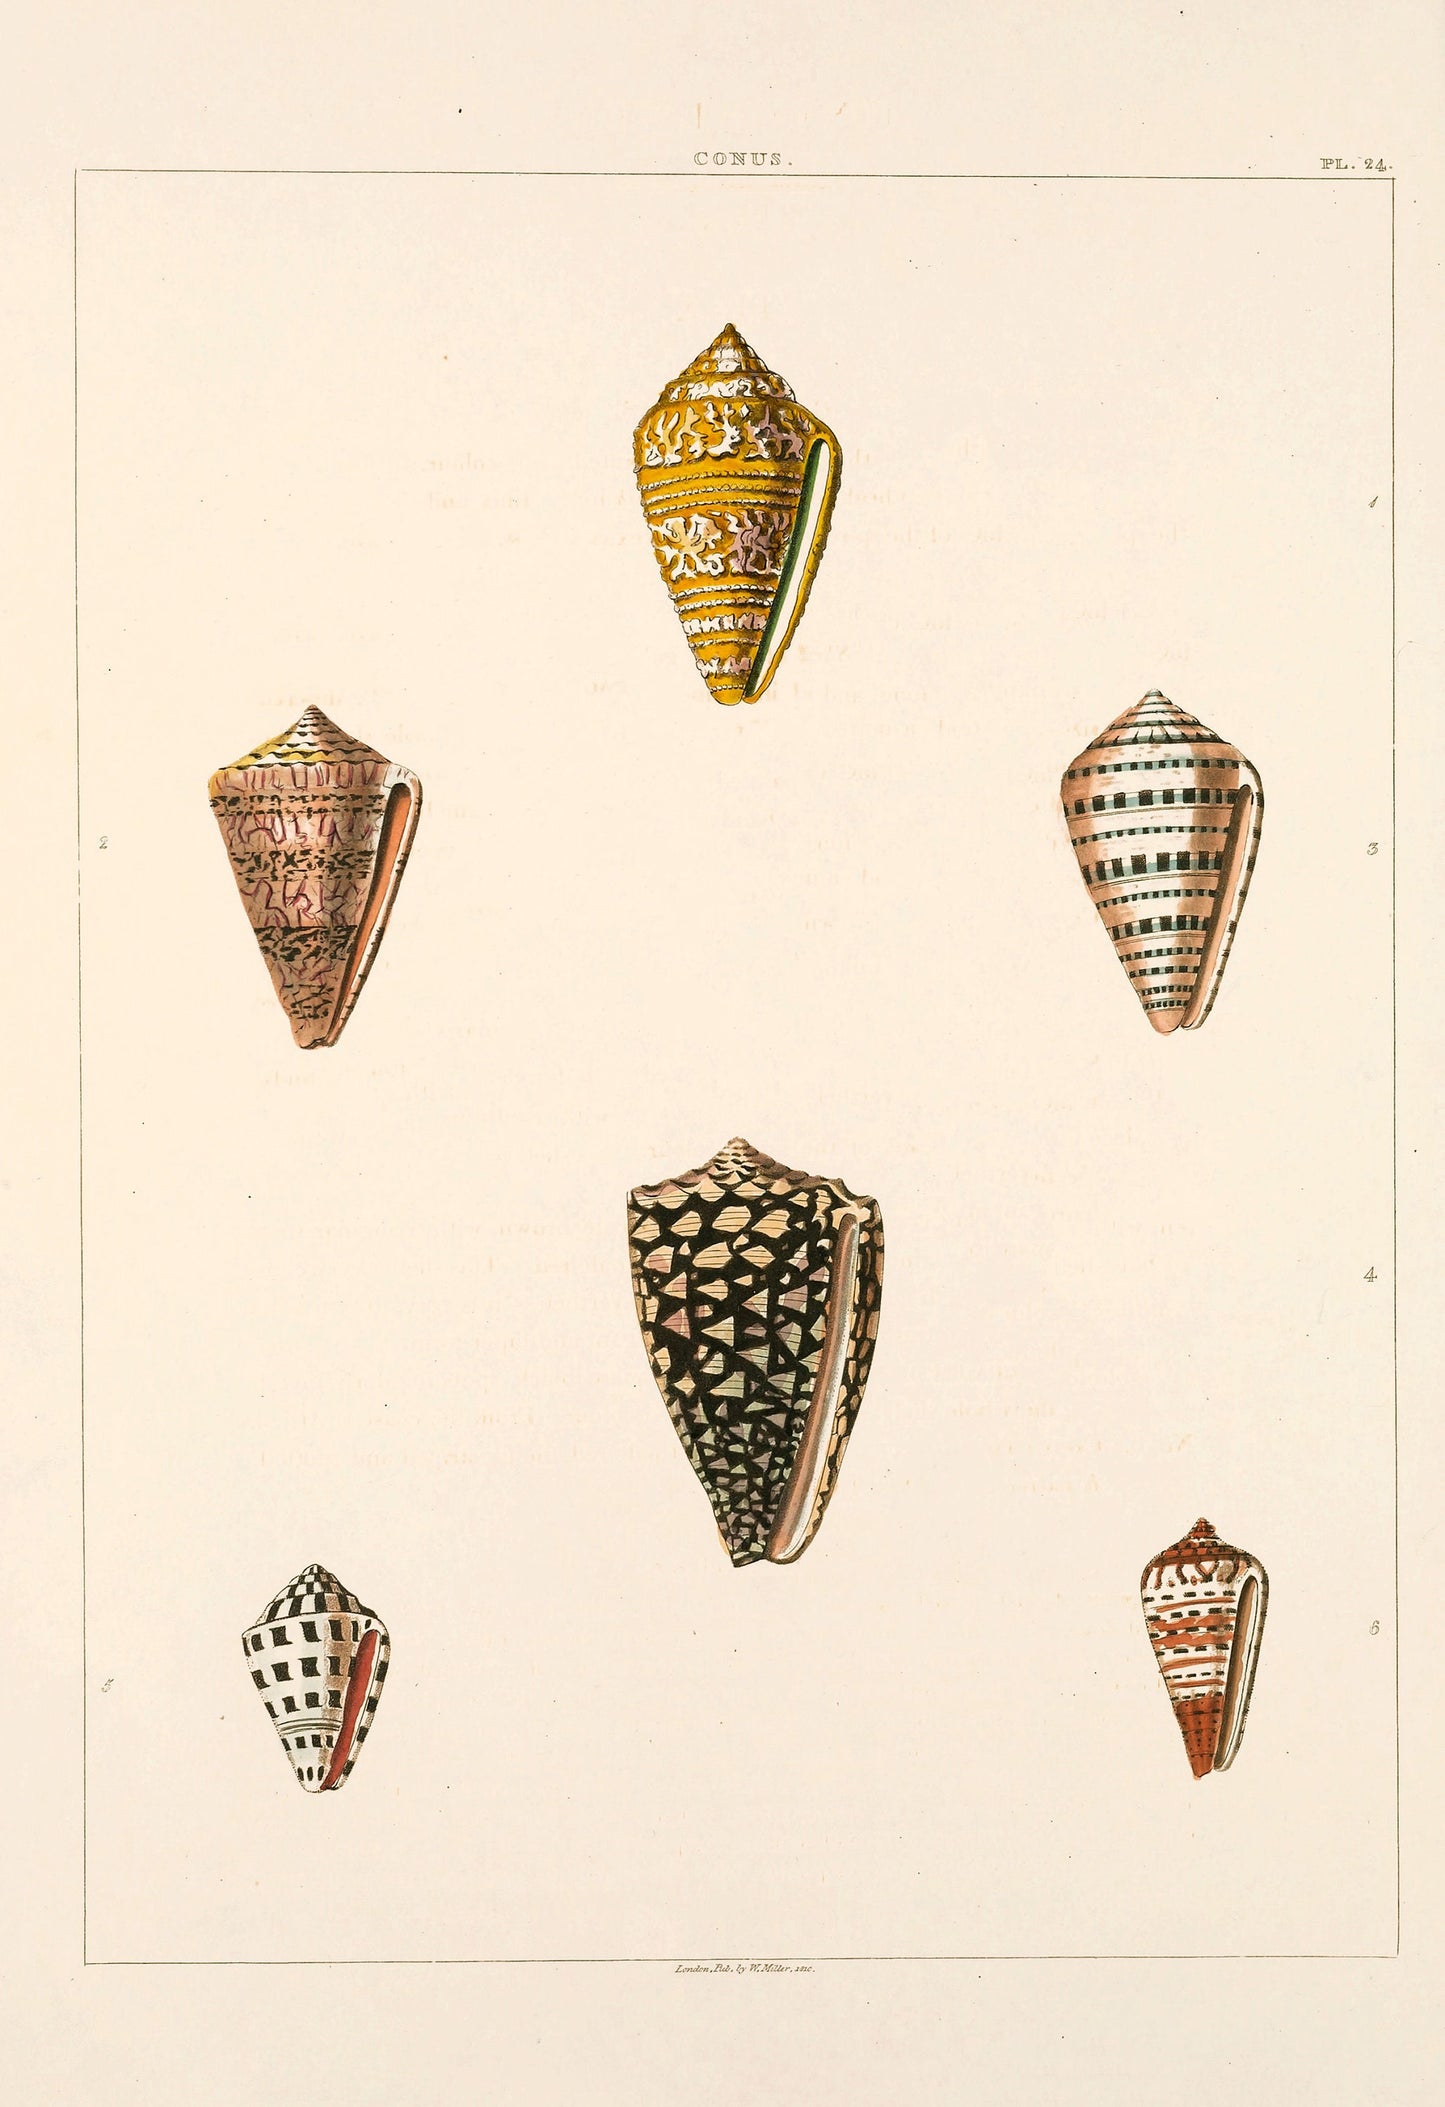 Conchology or the Natural History of Shells [61 Images]